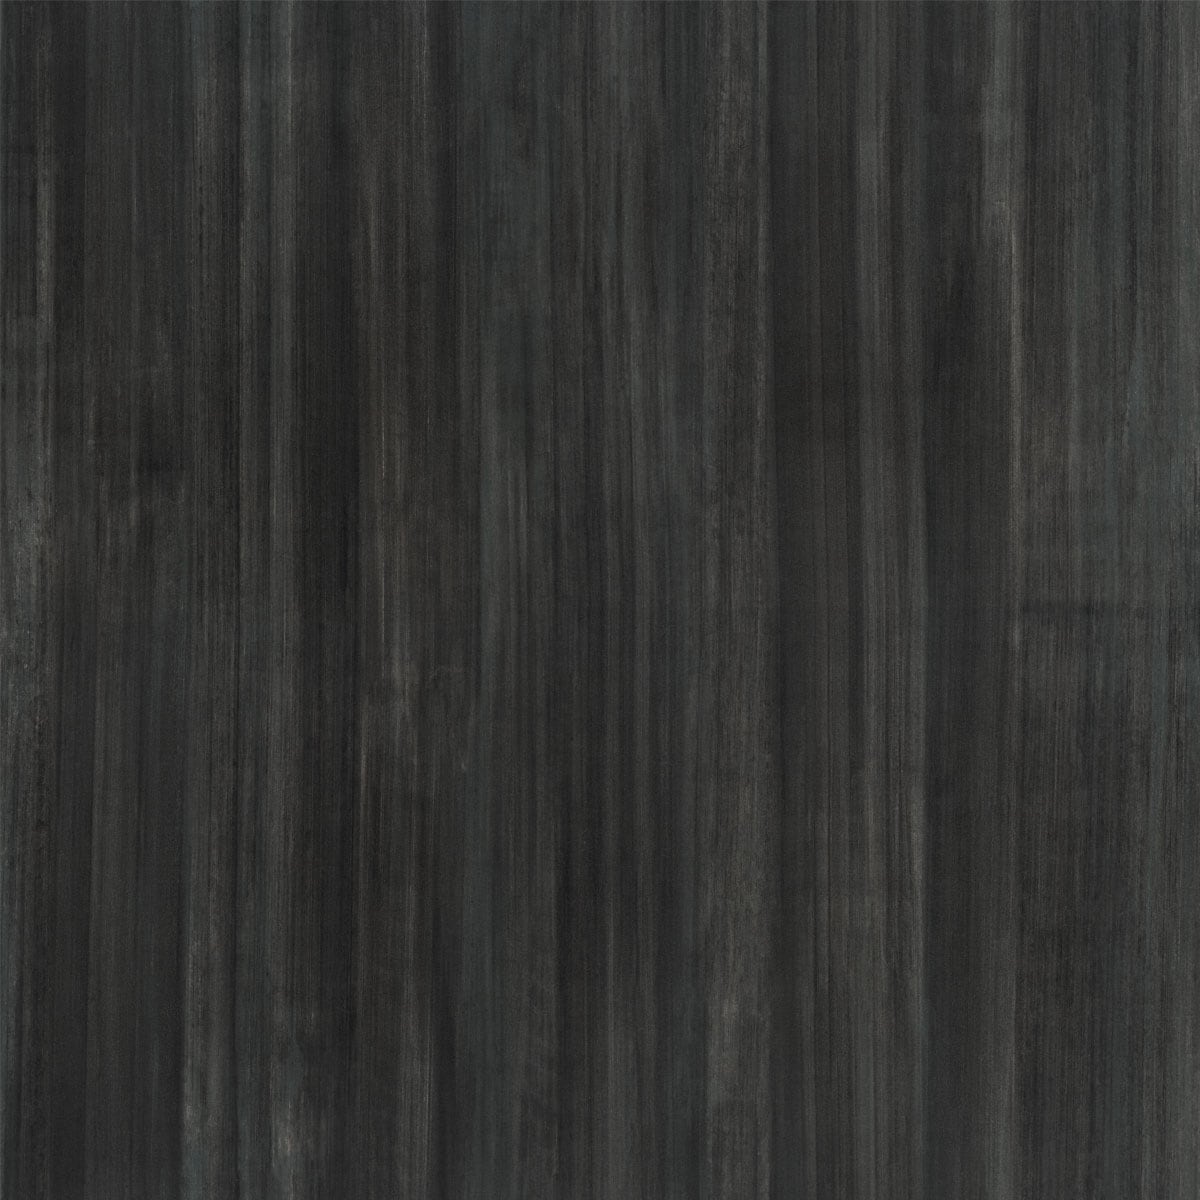 5 ft. x 12 ft. Laminate Sheet in Black Birchply with Premiumfx Natural  Grain Finish